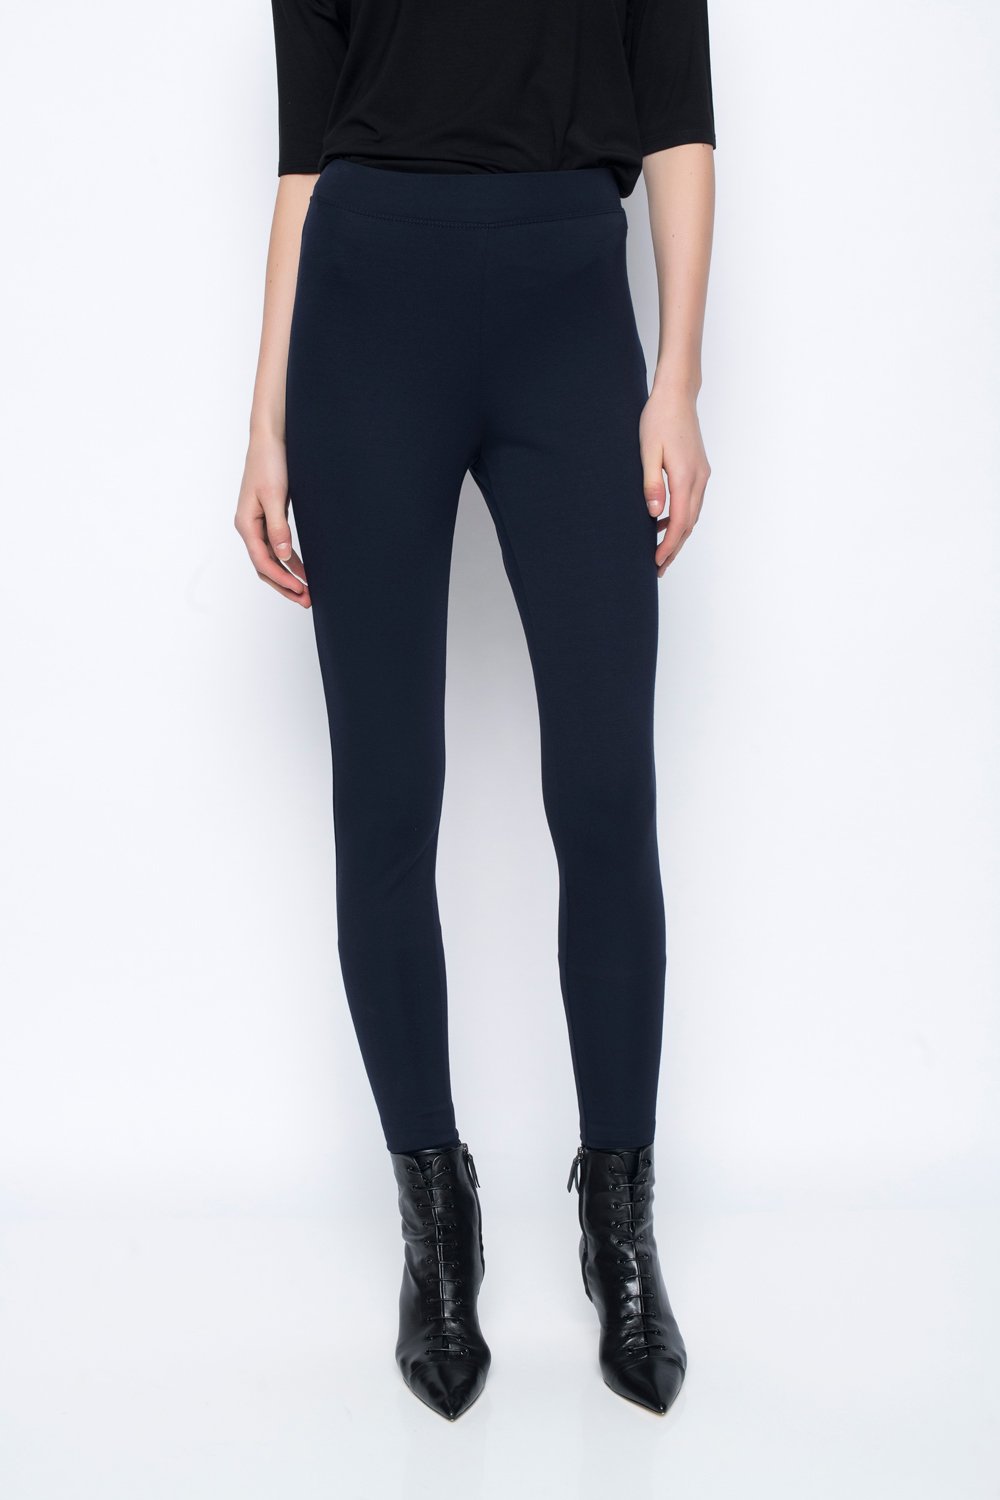 Best Selling Pull-On Straight Leg Pant Petite Size, Picadilly Canada